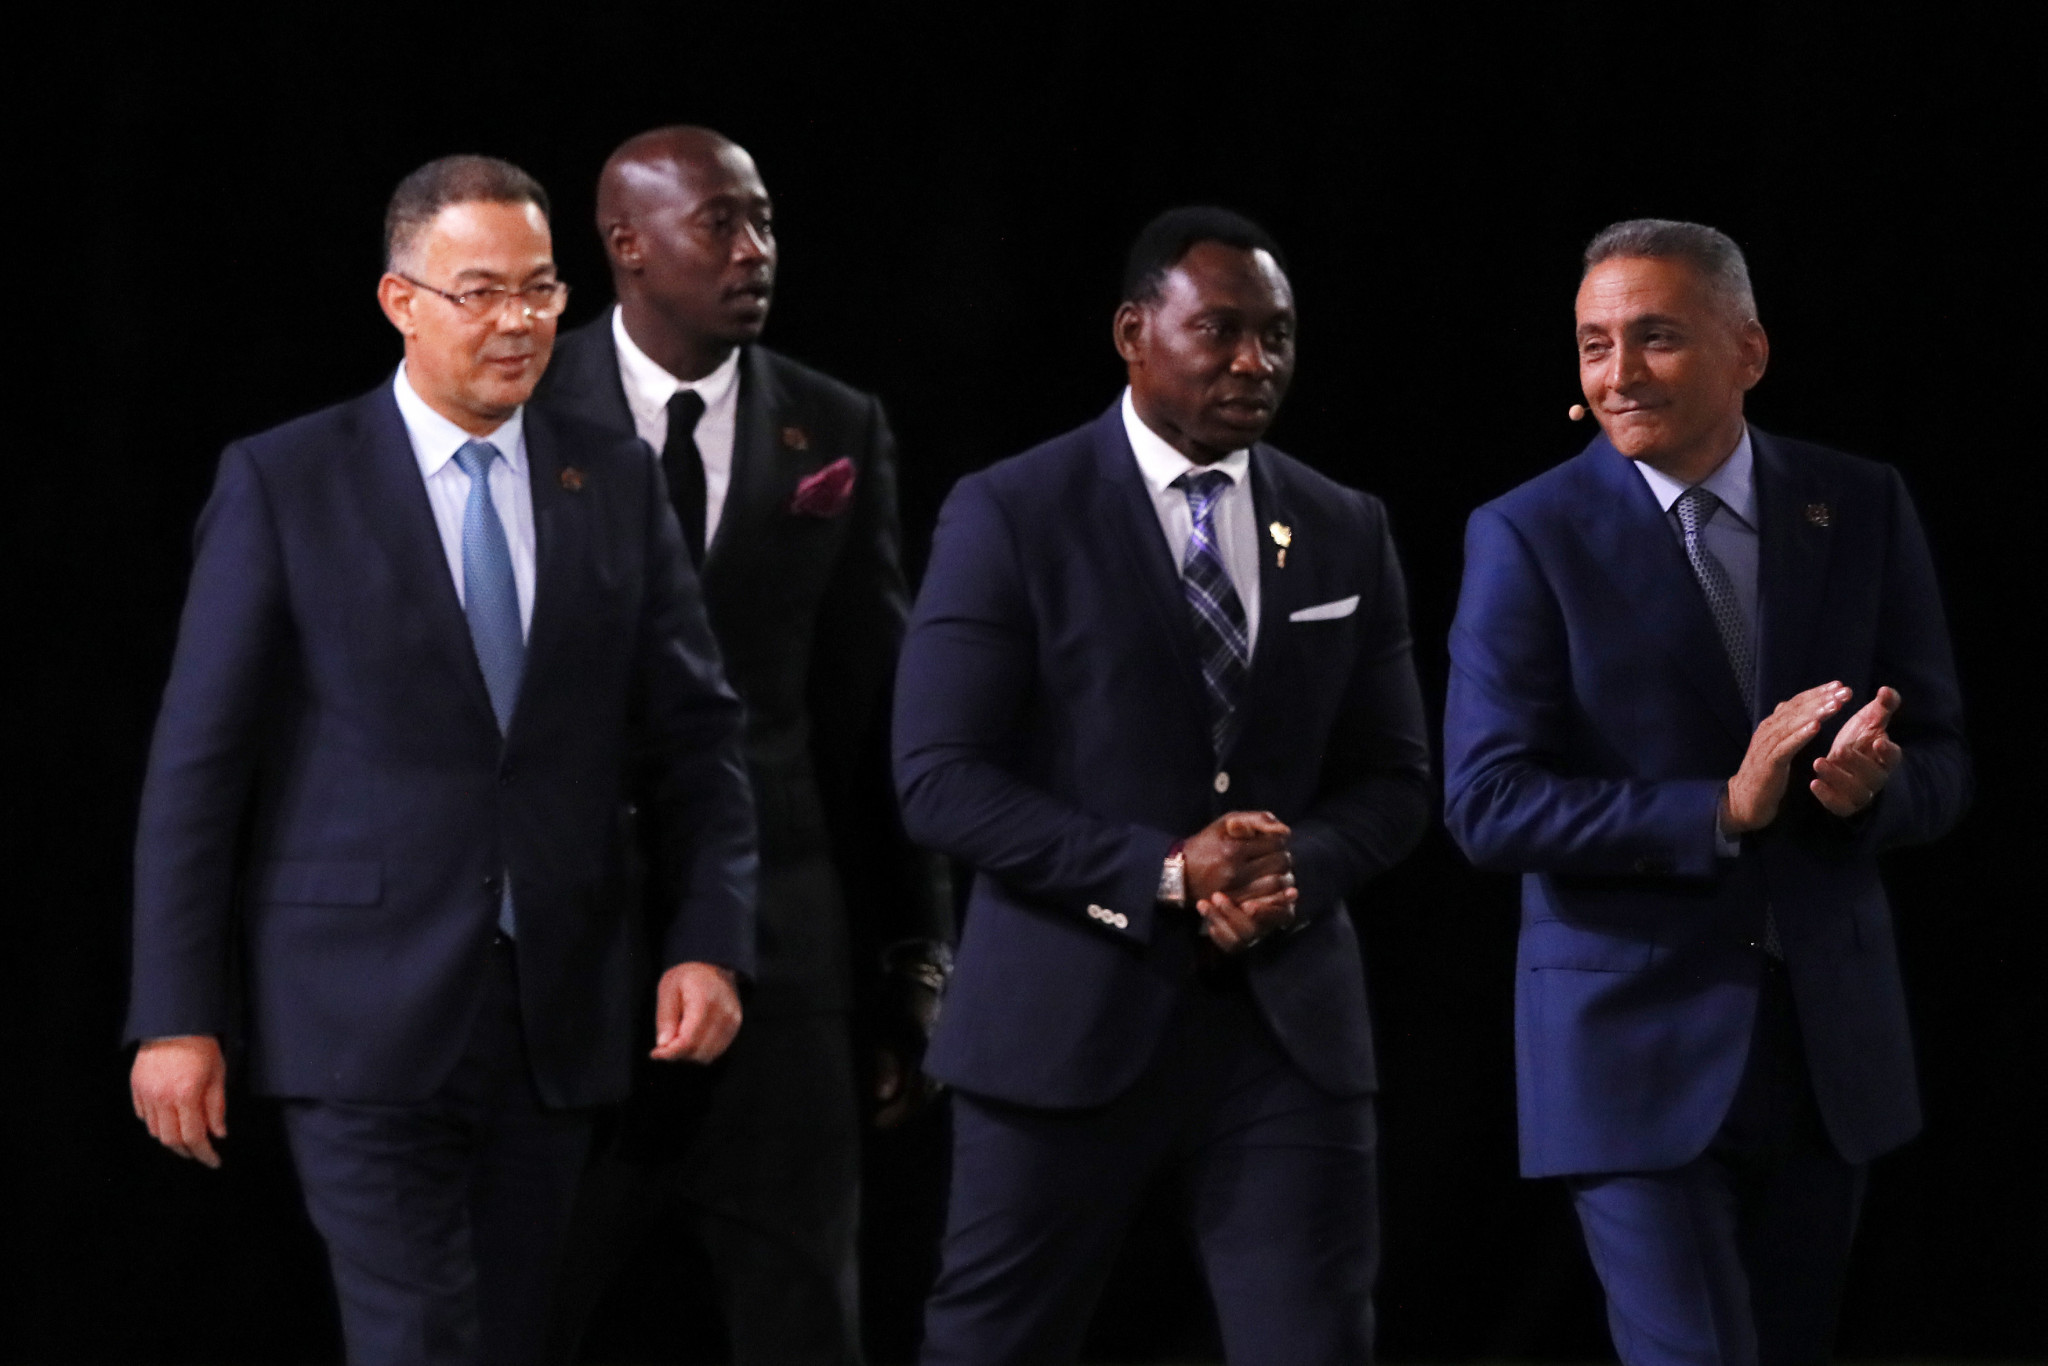 Morocco 2026 speakers make their way to the stage ©Getty Images